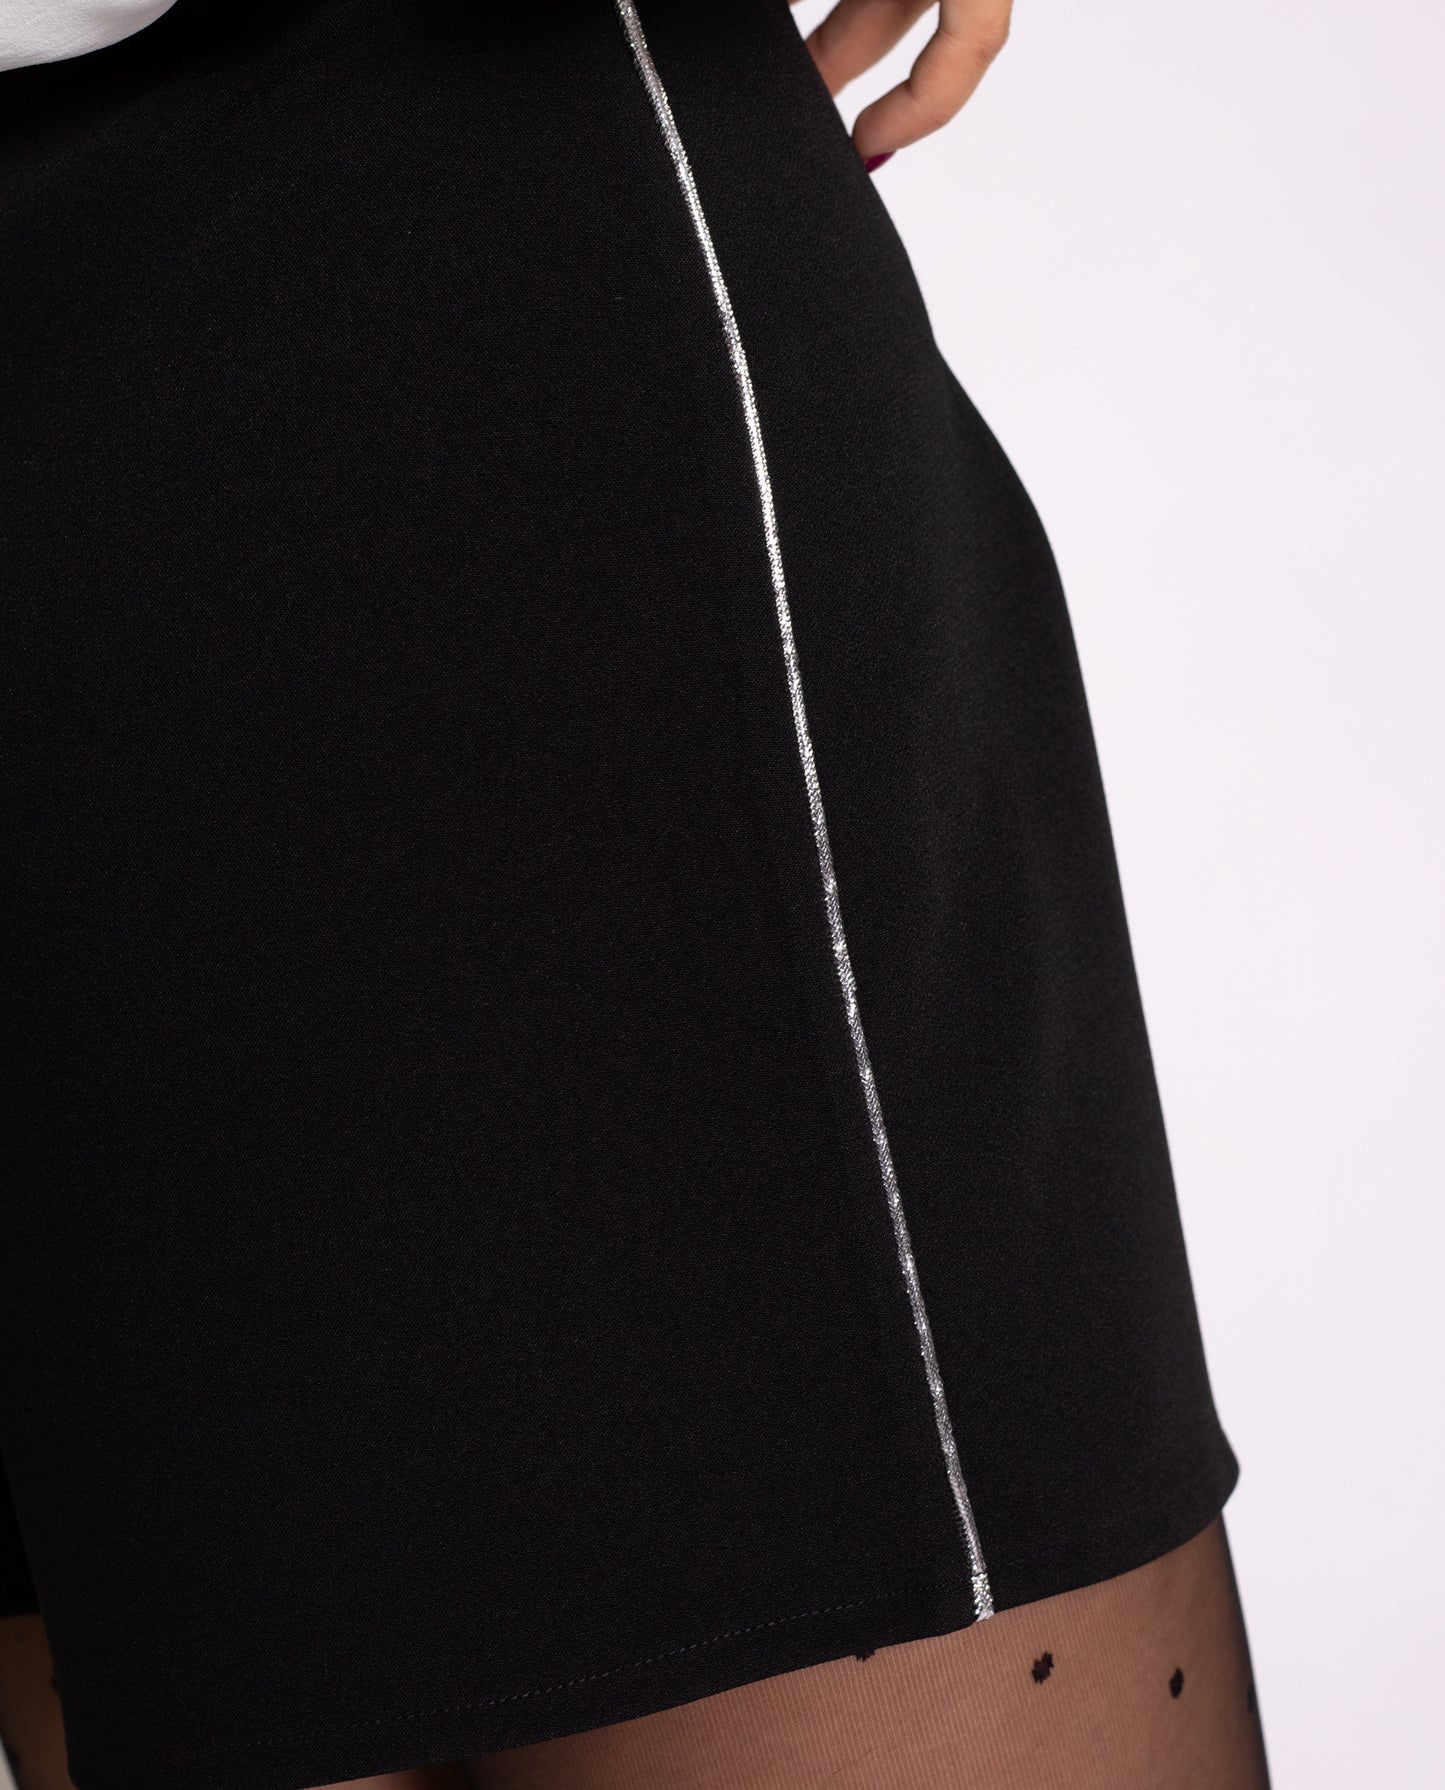 IMPERIAL SHORTS - BLACK